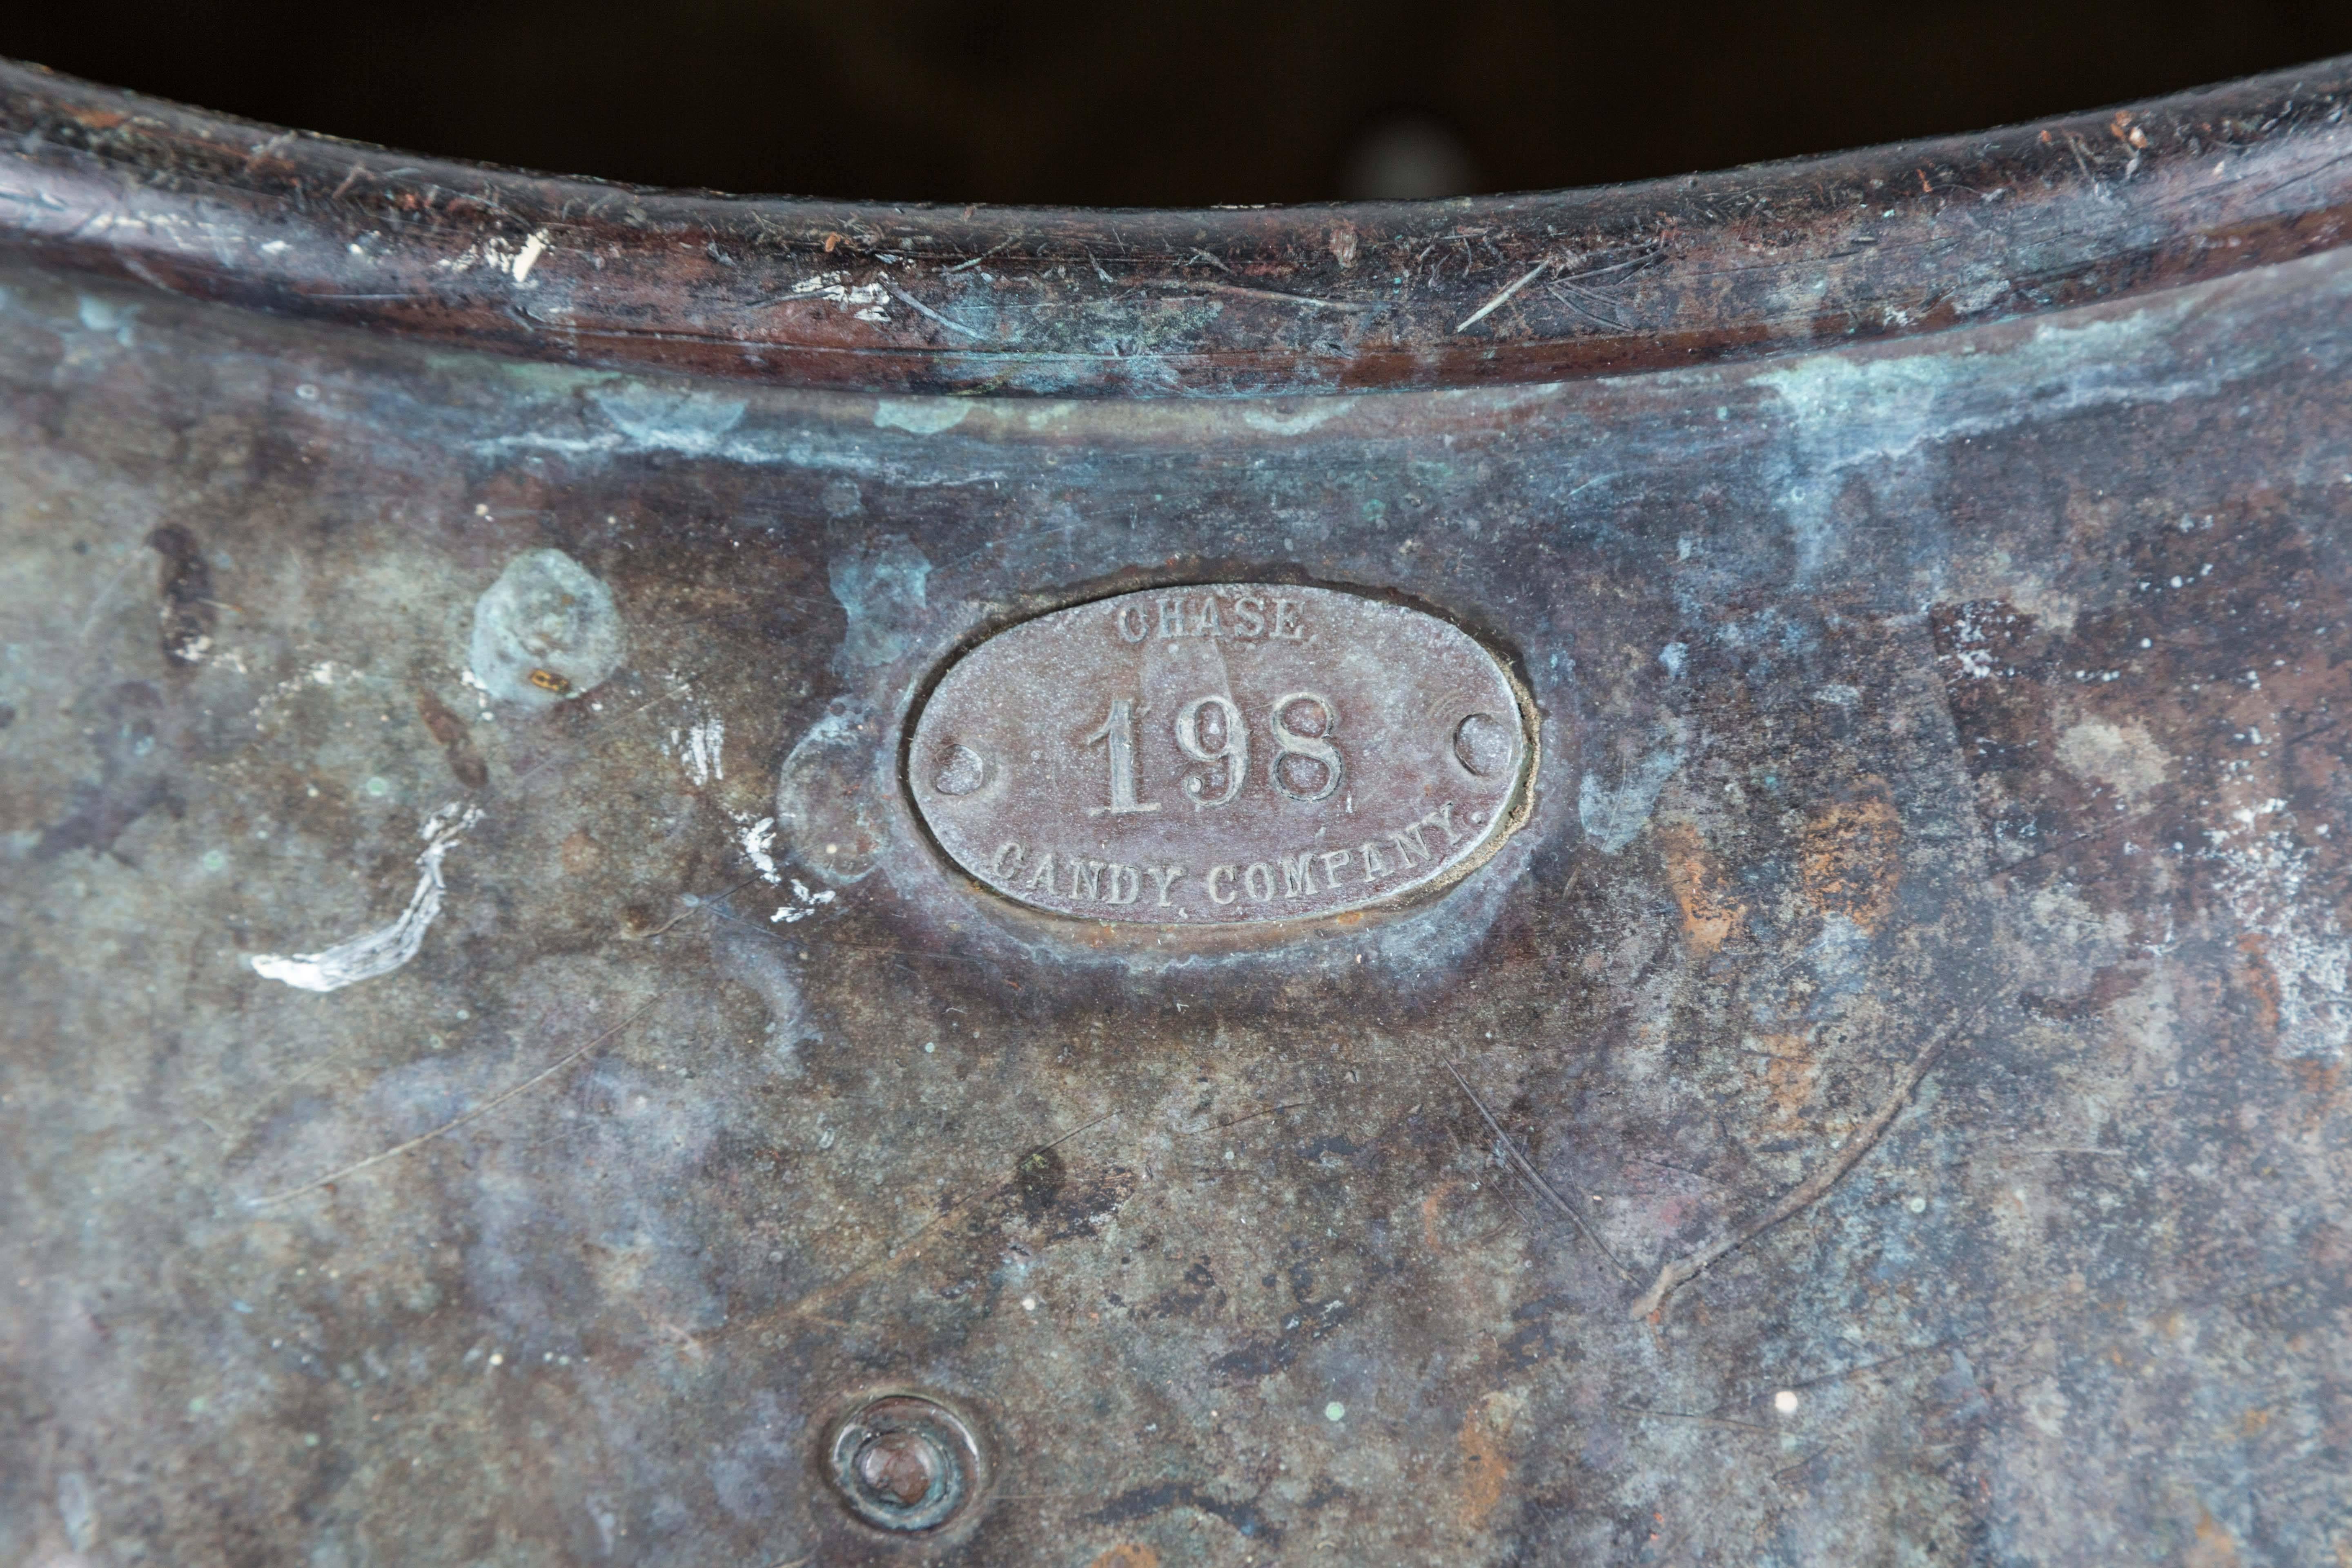 This is one of those things with a great wow factor and story all in one. Substantial hand-hammered copper kettle from the Chase Candy Company in St. Louis, Missouri. Impressive scale and rolled rim with original brass factory tag marked 